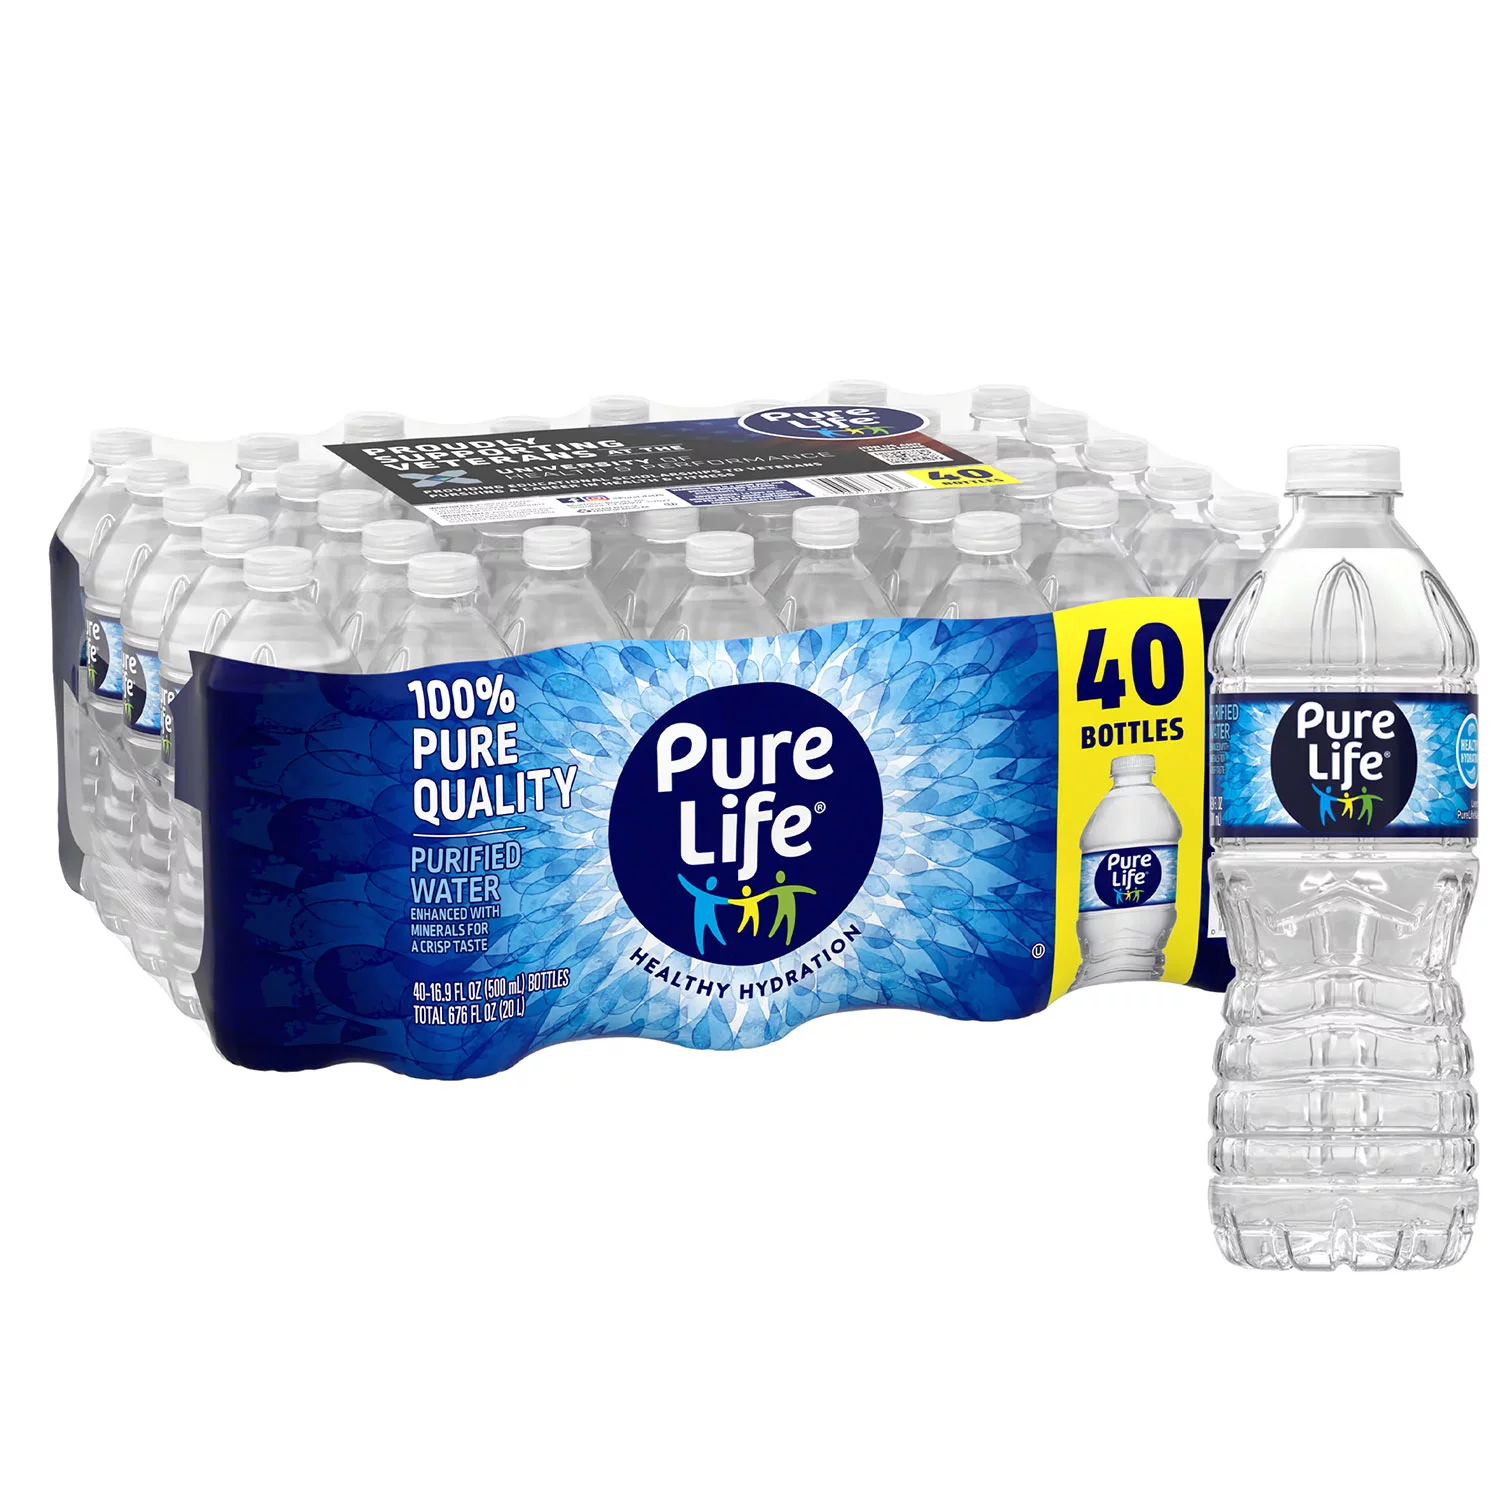 Buy from Fornaxmall.com- Pure Life Purified Water -16.9 fl. oz - 40 Counts